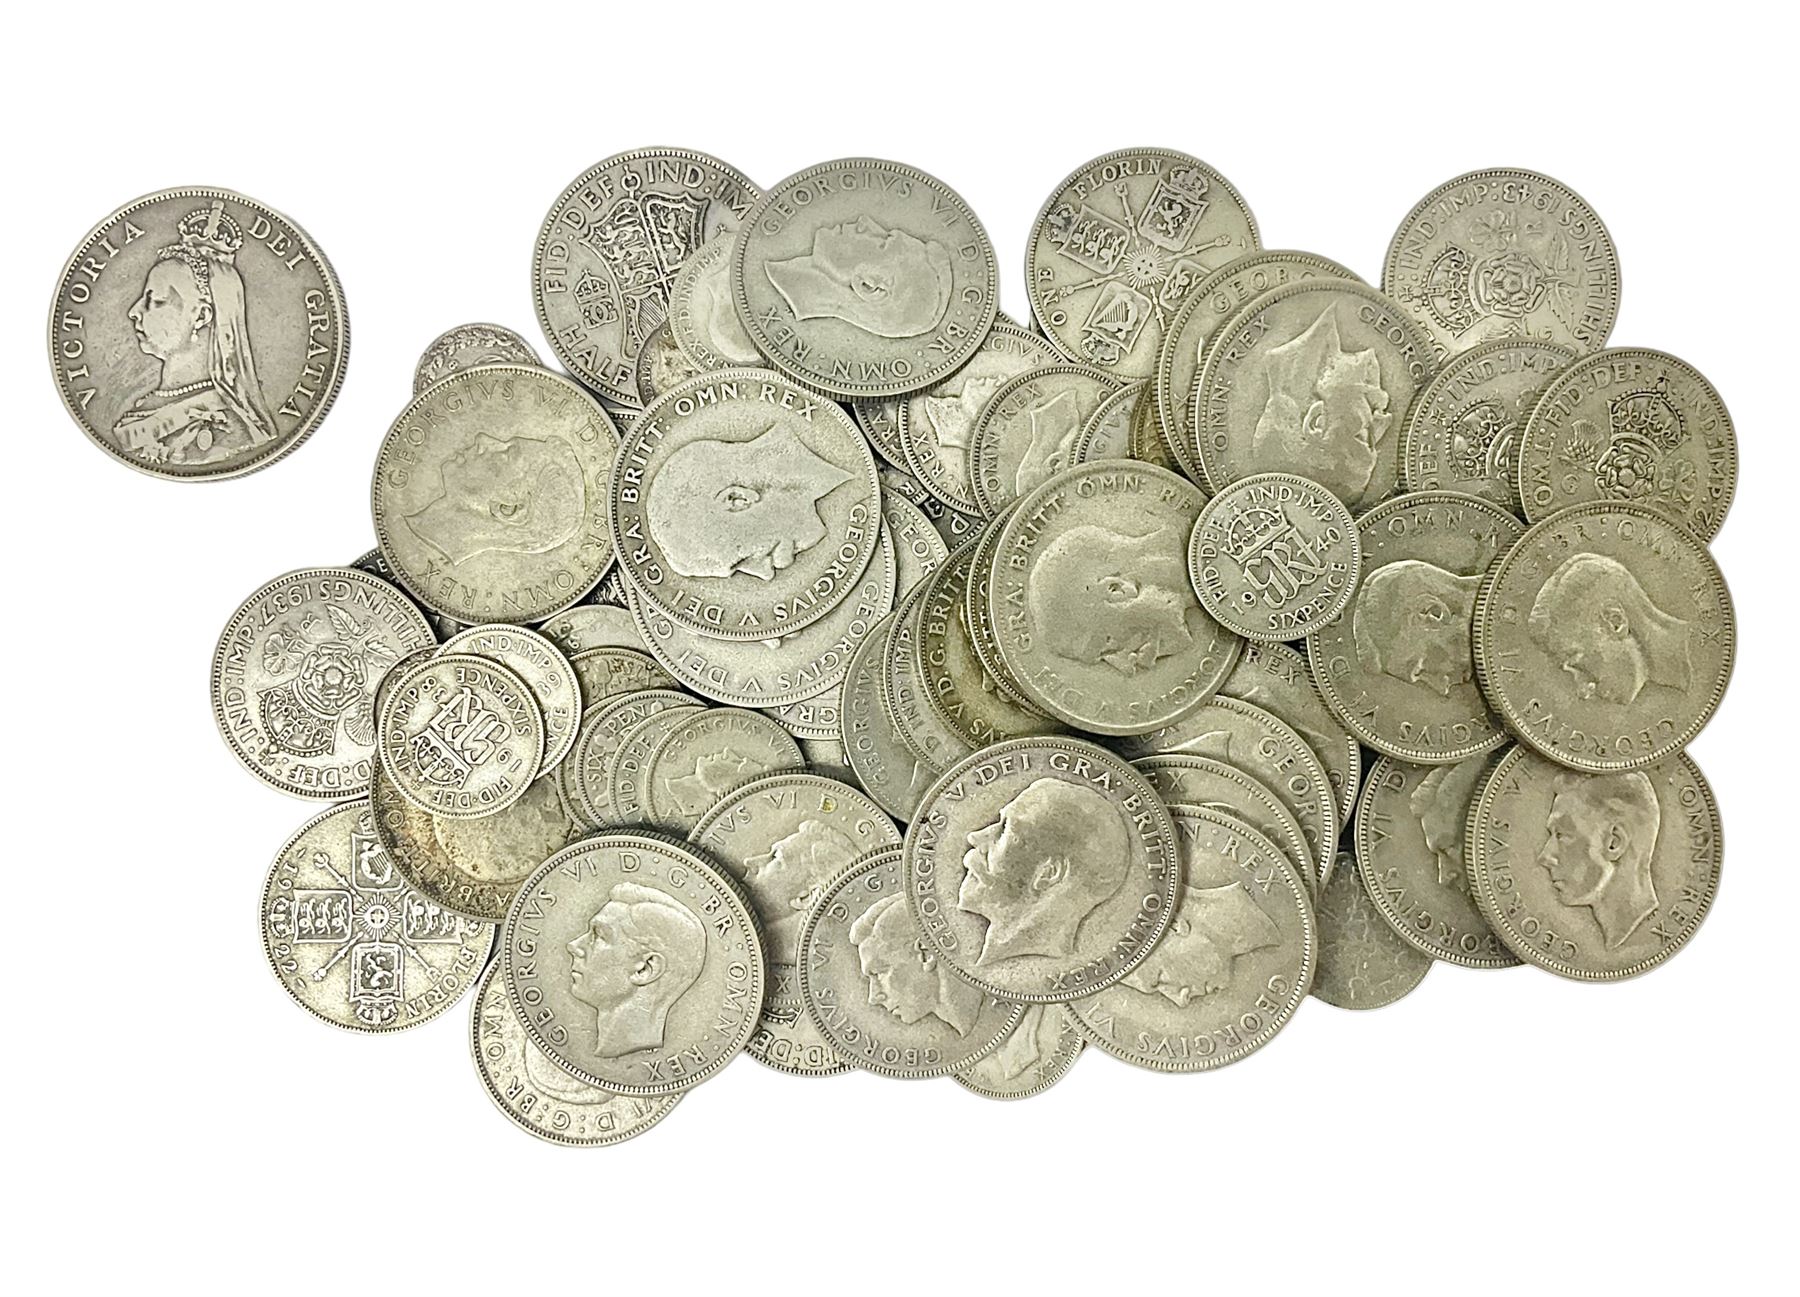 Approximately 600 grams of Great British pre 1947 silver coins including sixpences